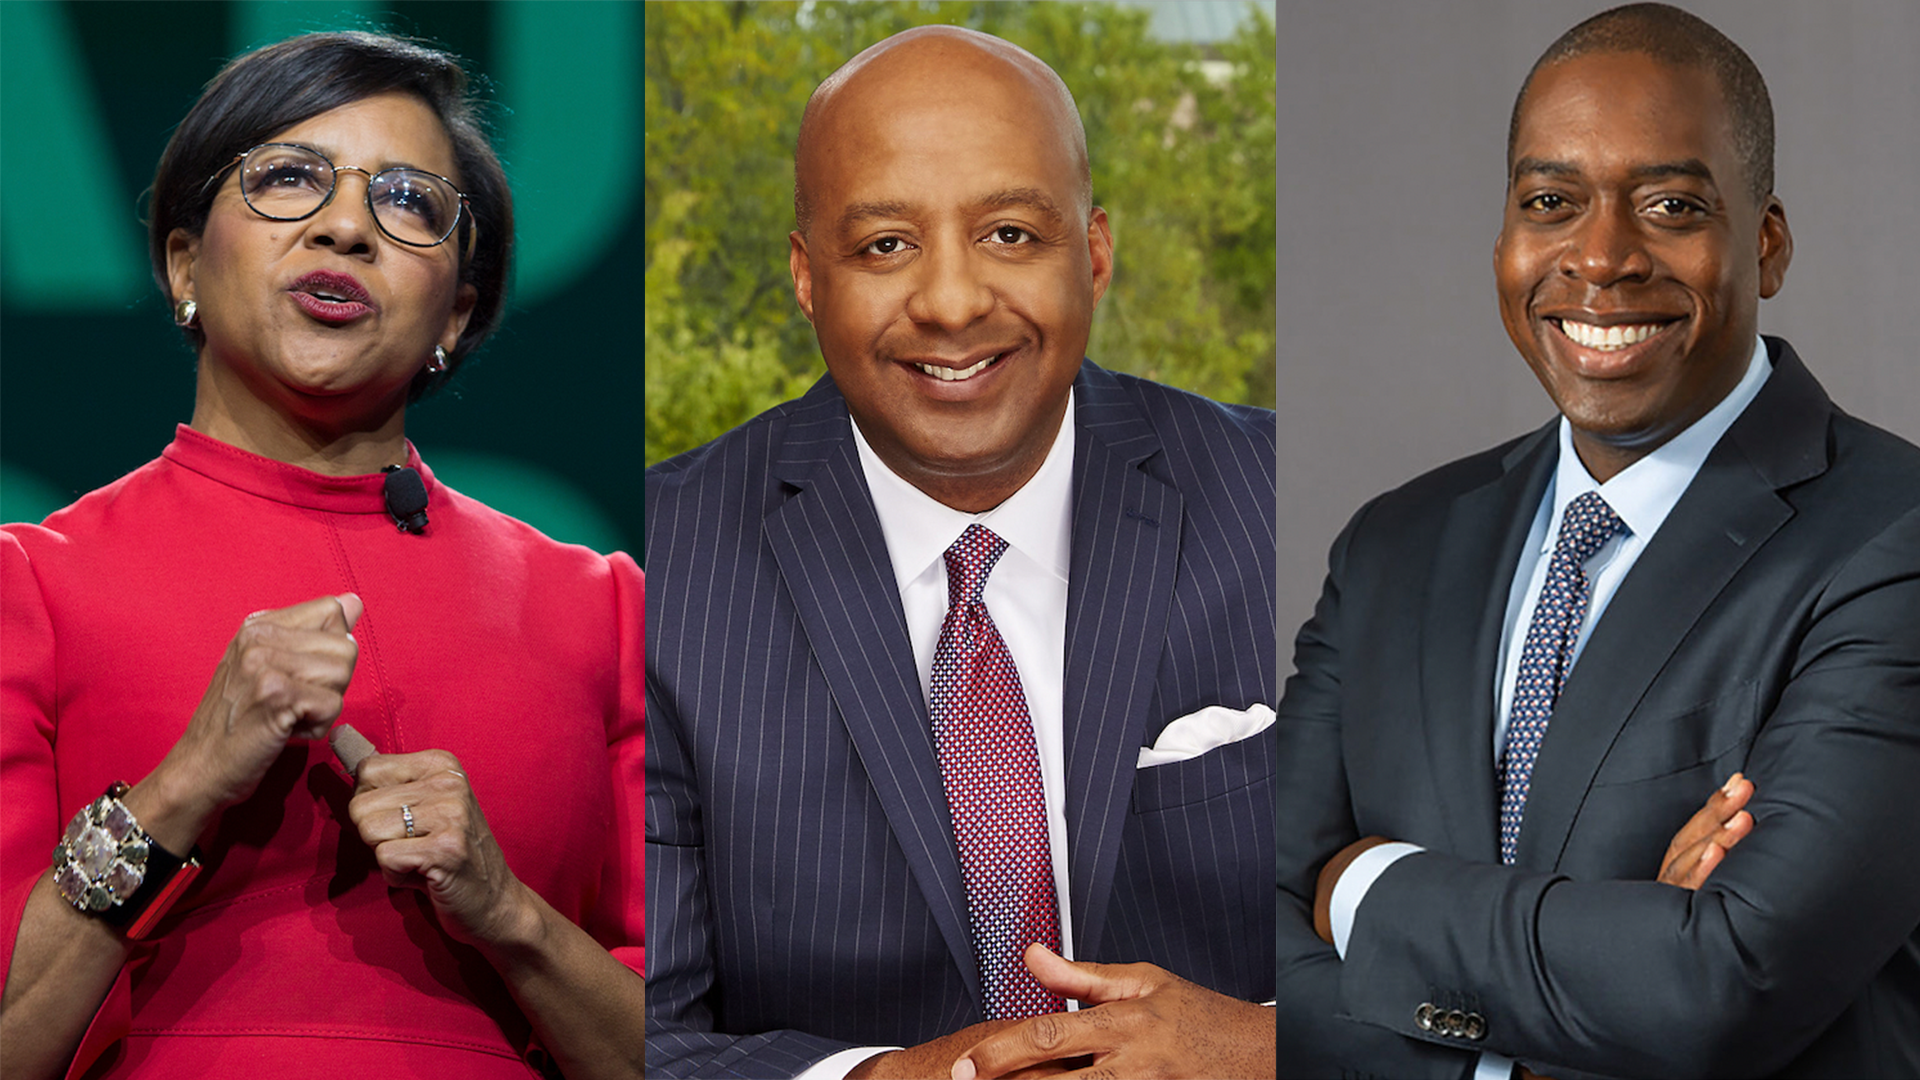 The Fortune 500 List Has A 'Record Number' Of Black CEOs — But There's Still Only 6 Of Them